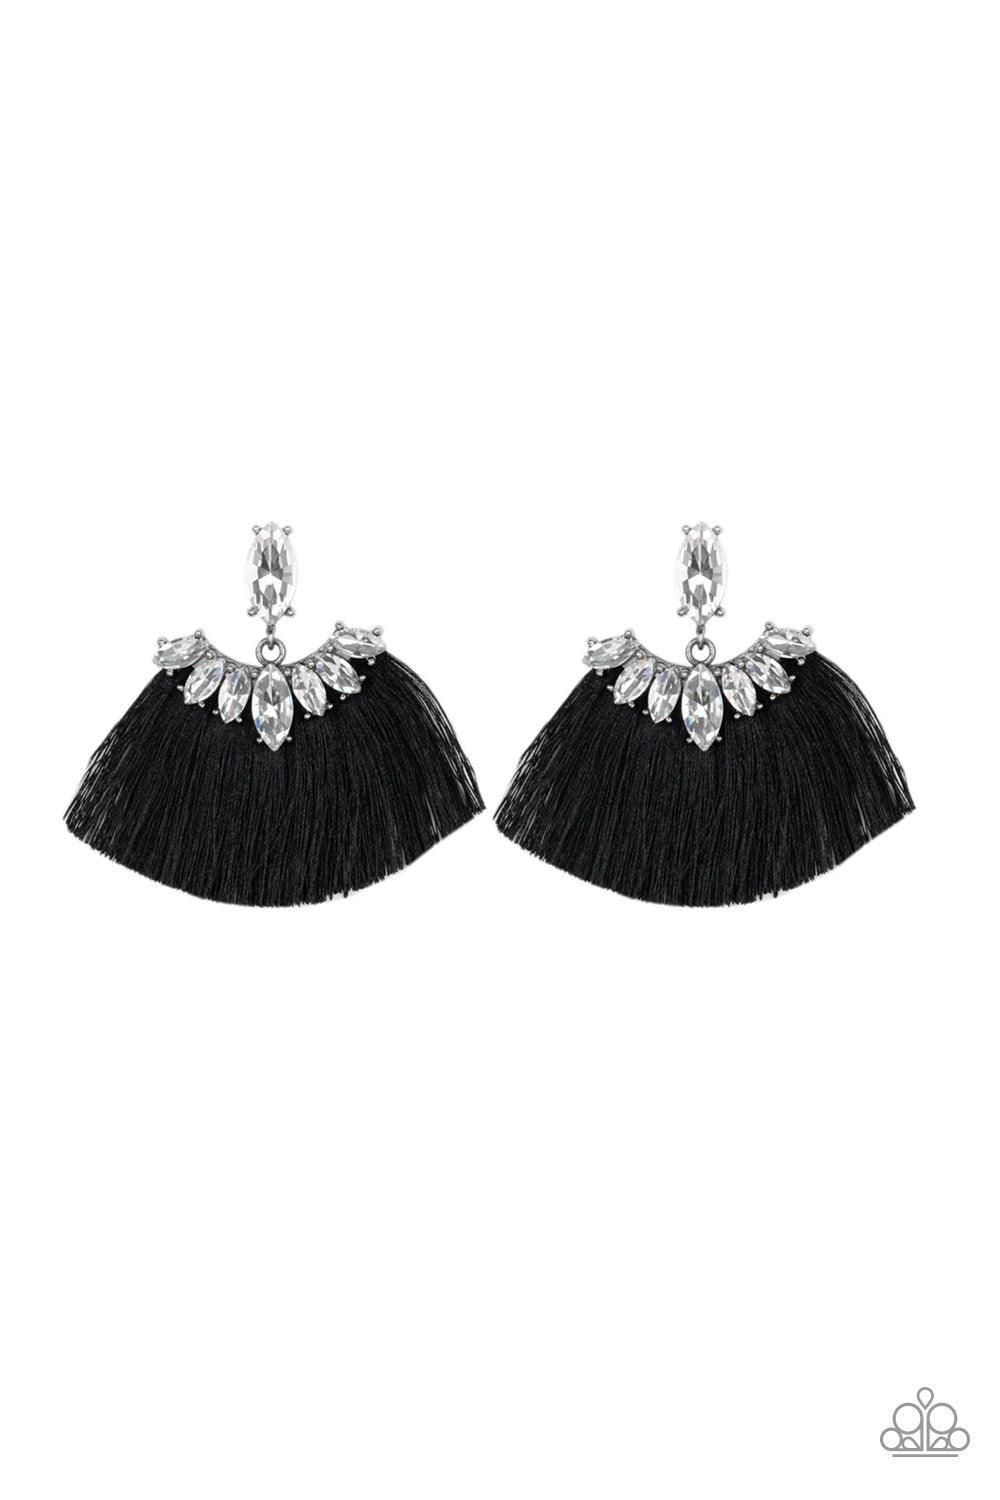 Paparazzi Accessories Formal Flair - Black A solitaire marquise-cut rhinestone gives way to a plume of shiny black thread crowned in a matching rhinestone encrusted fringe for a glamorous look. Earring attaches to a standard post fitting. Jewelry